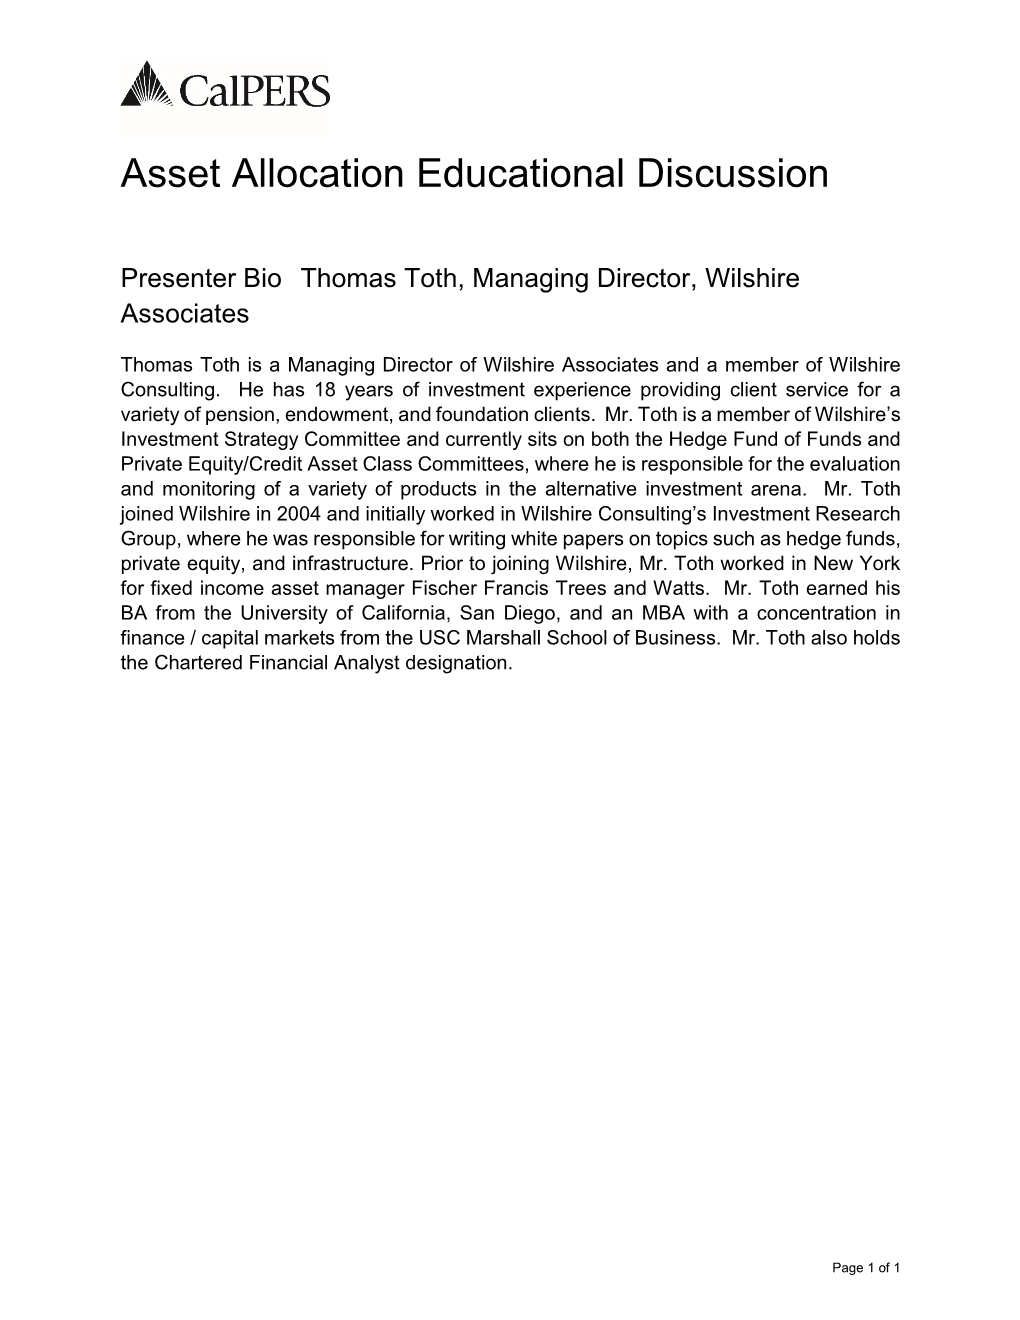 Asset Allocation Educational Discussion Biographies